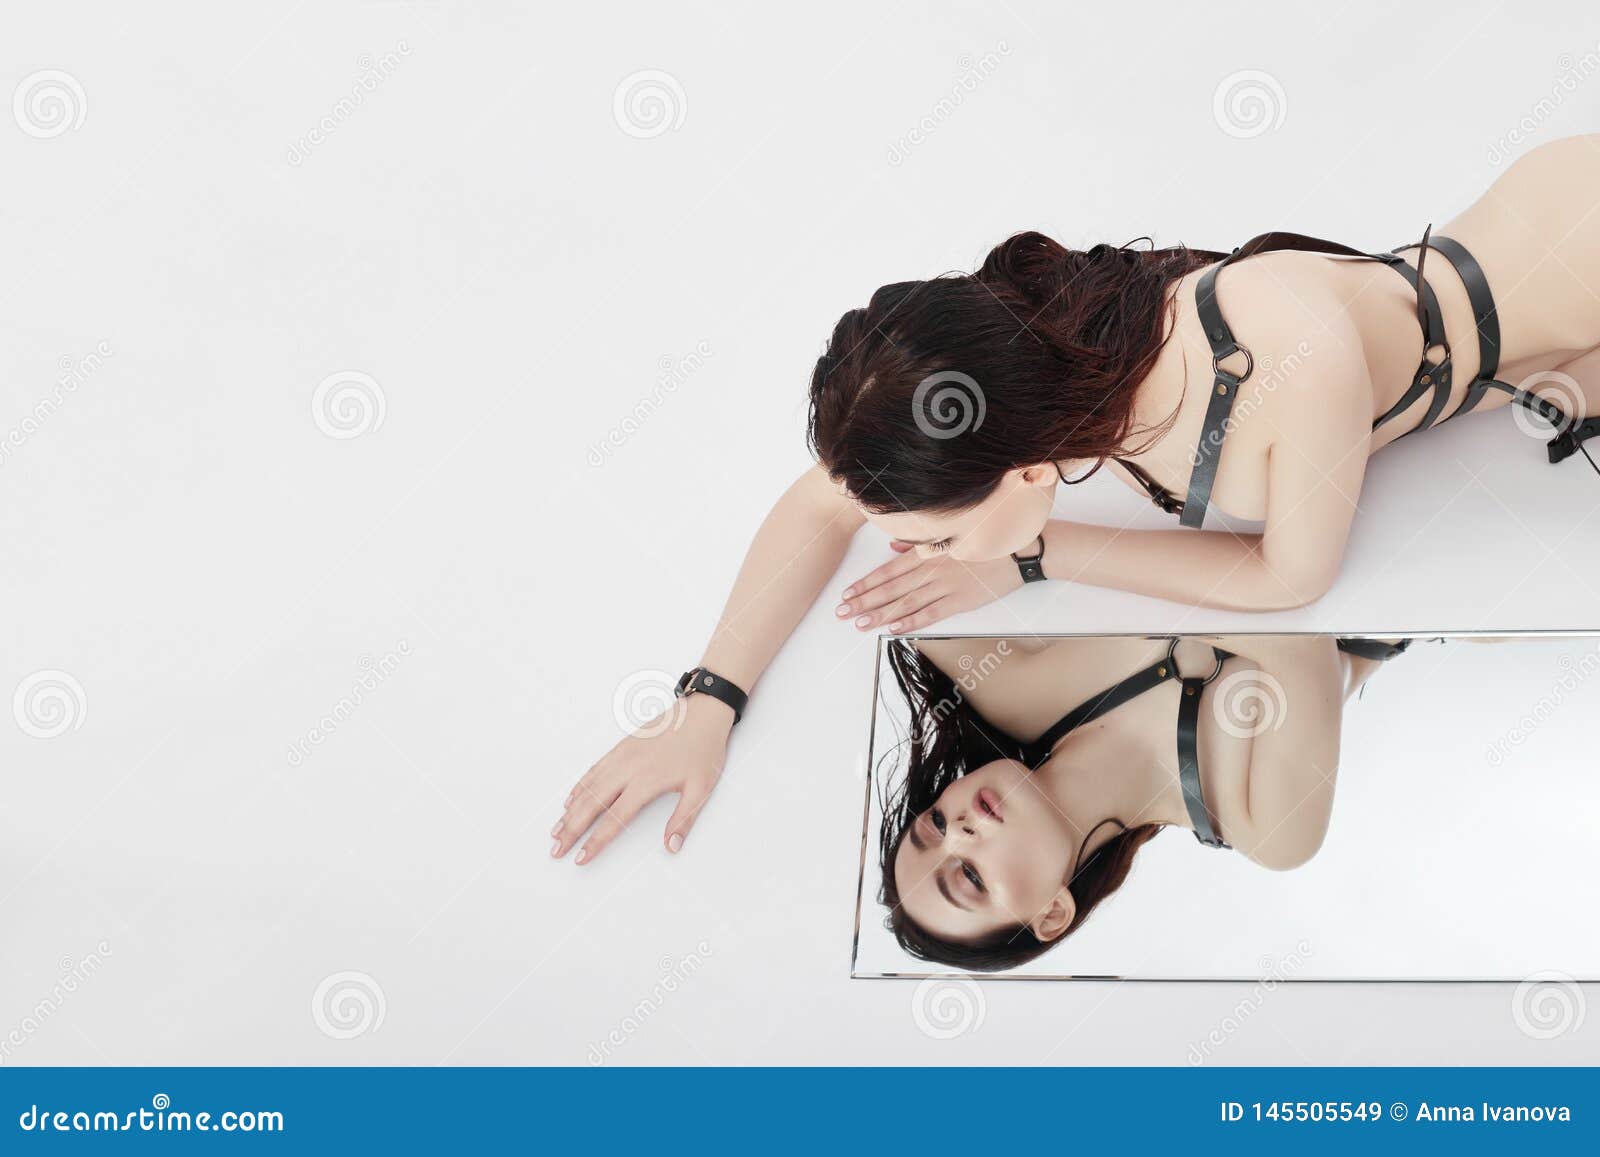 Nude Fashion Woman Lies on Mirror and Looks at Her Reflection